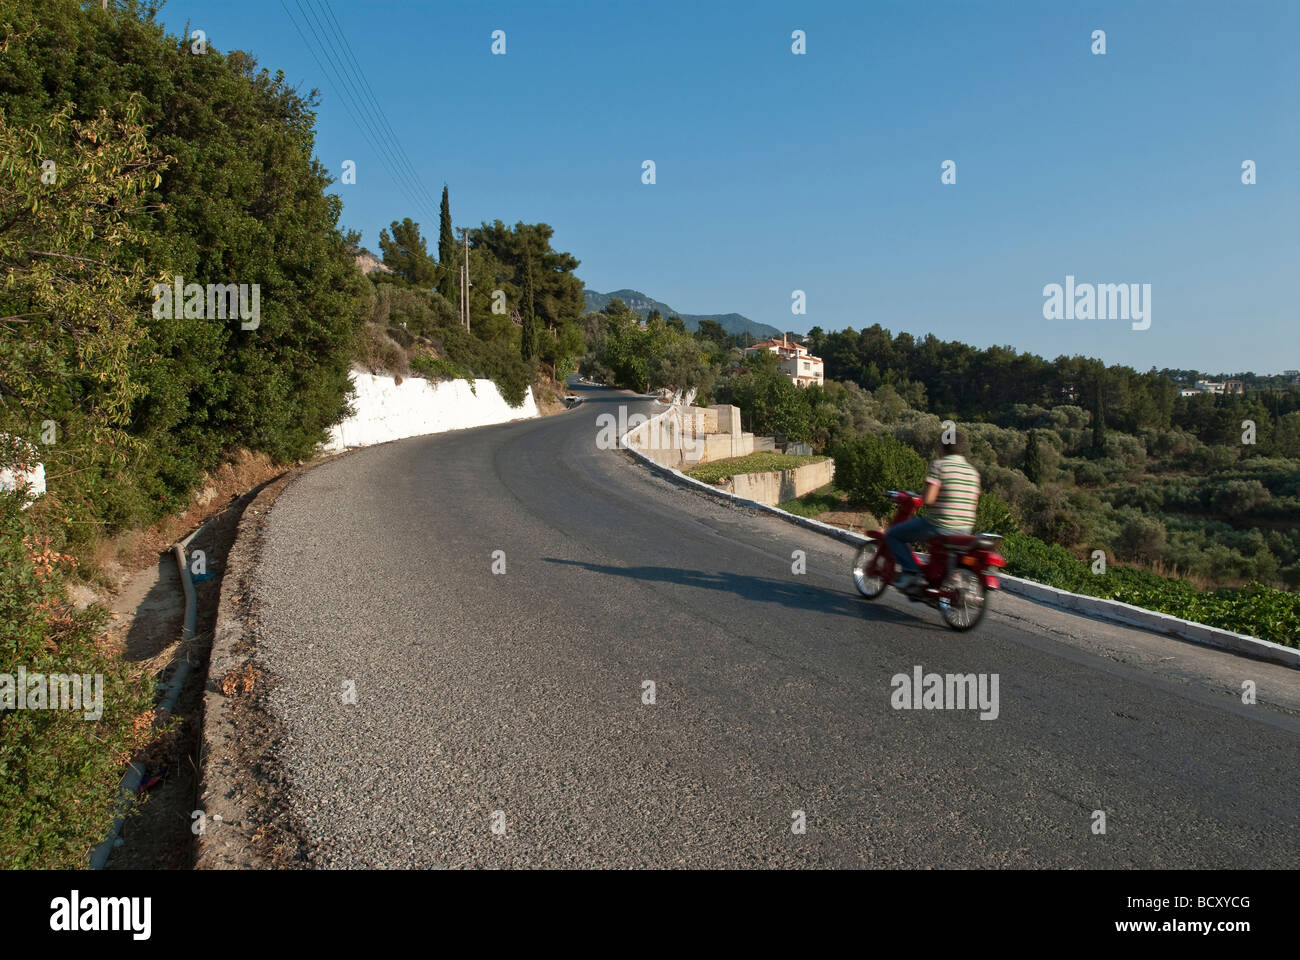 scenes from a greek aegean island. Driver on motorbike on a road leading up the hill to a village on a greek island. Stock Photo